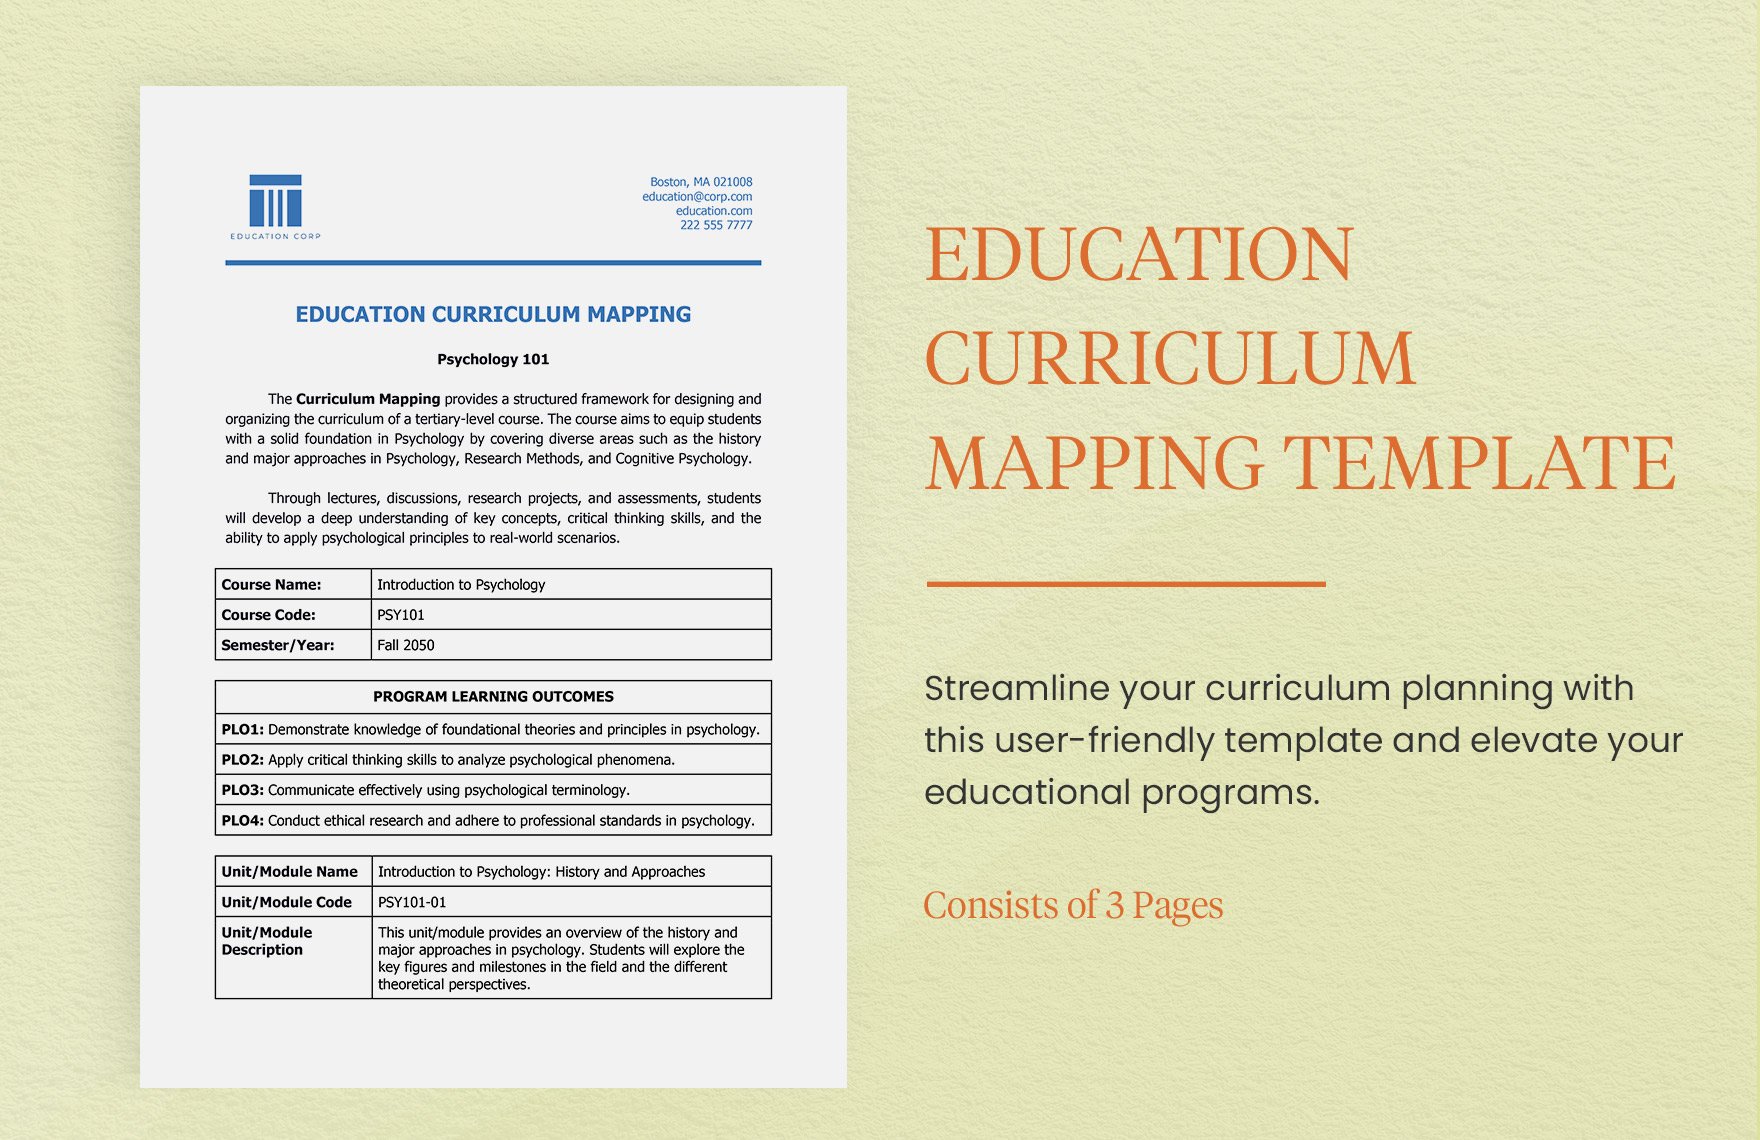 Education Curriculum Mapping Template